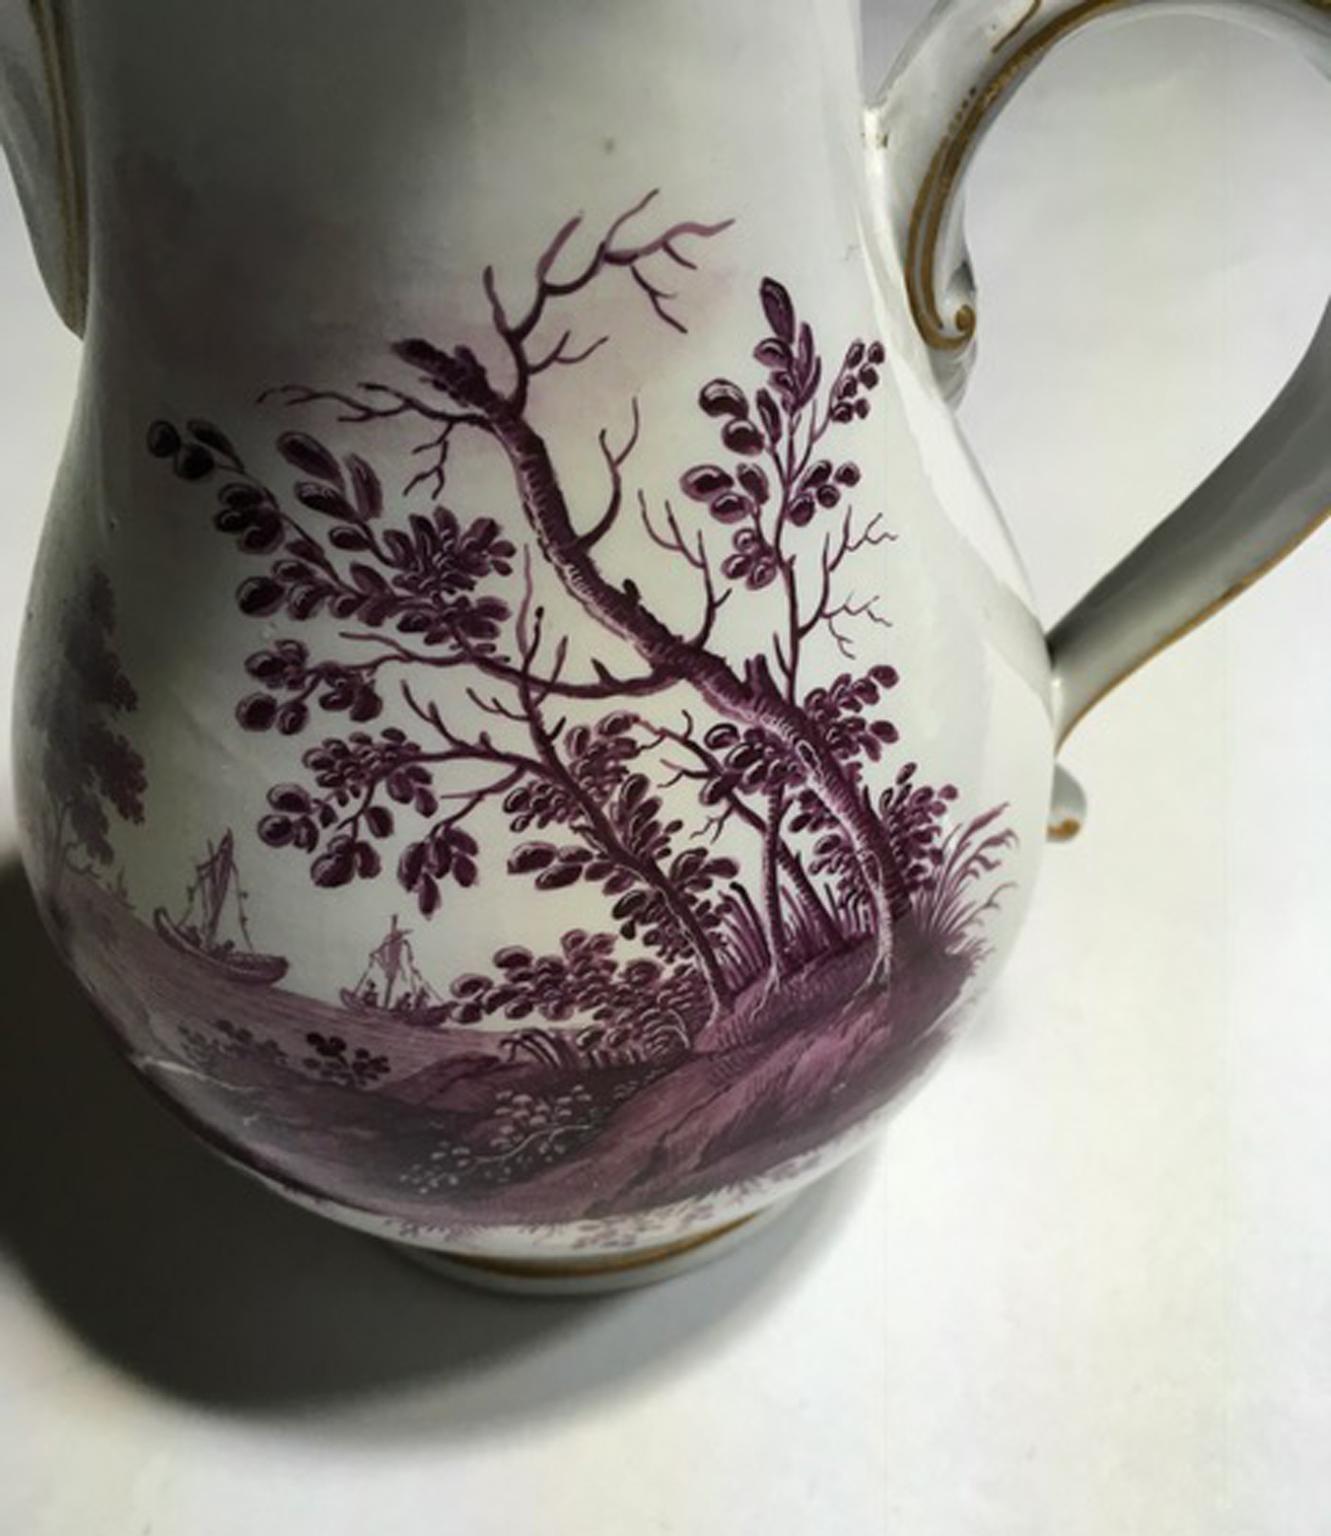 Italian Richard Ginori mid-18th century porcelain coffee or chocolate pot with landscapes.

This very elegant Richard Ginori porcelain coffee or chocolate pot was hand painted with country sides landscapes in purple.

The finely drawings are